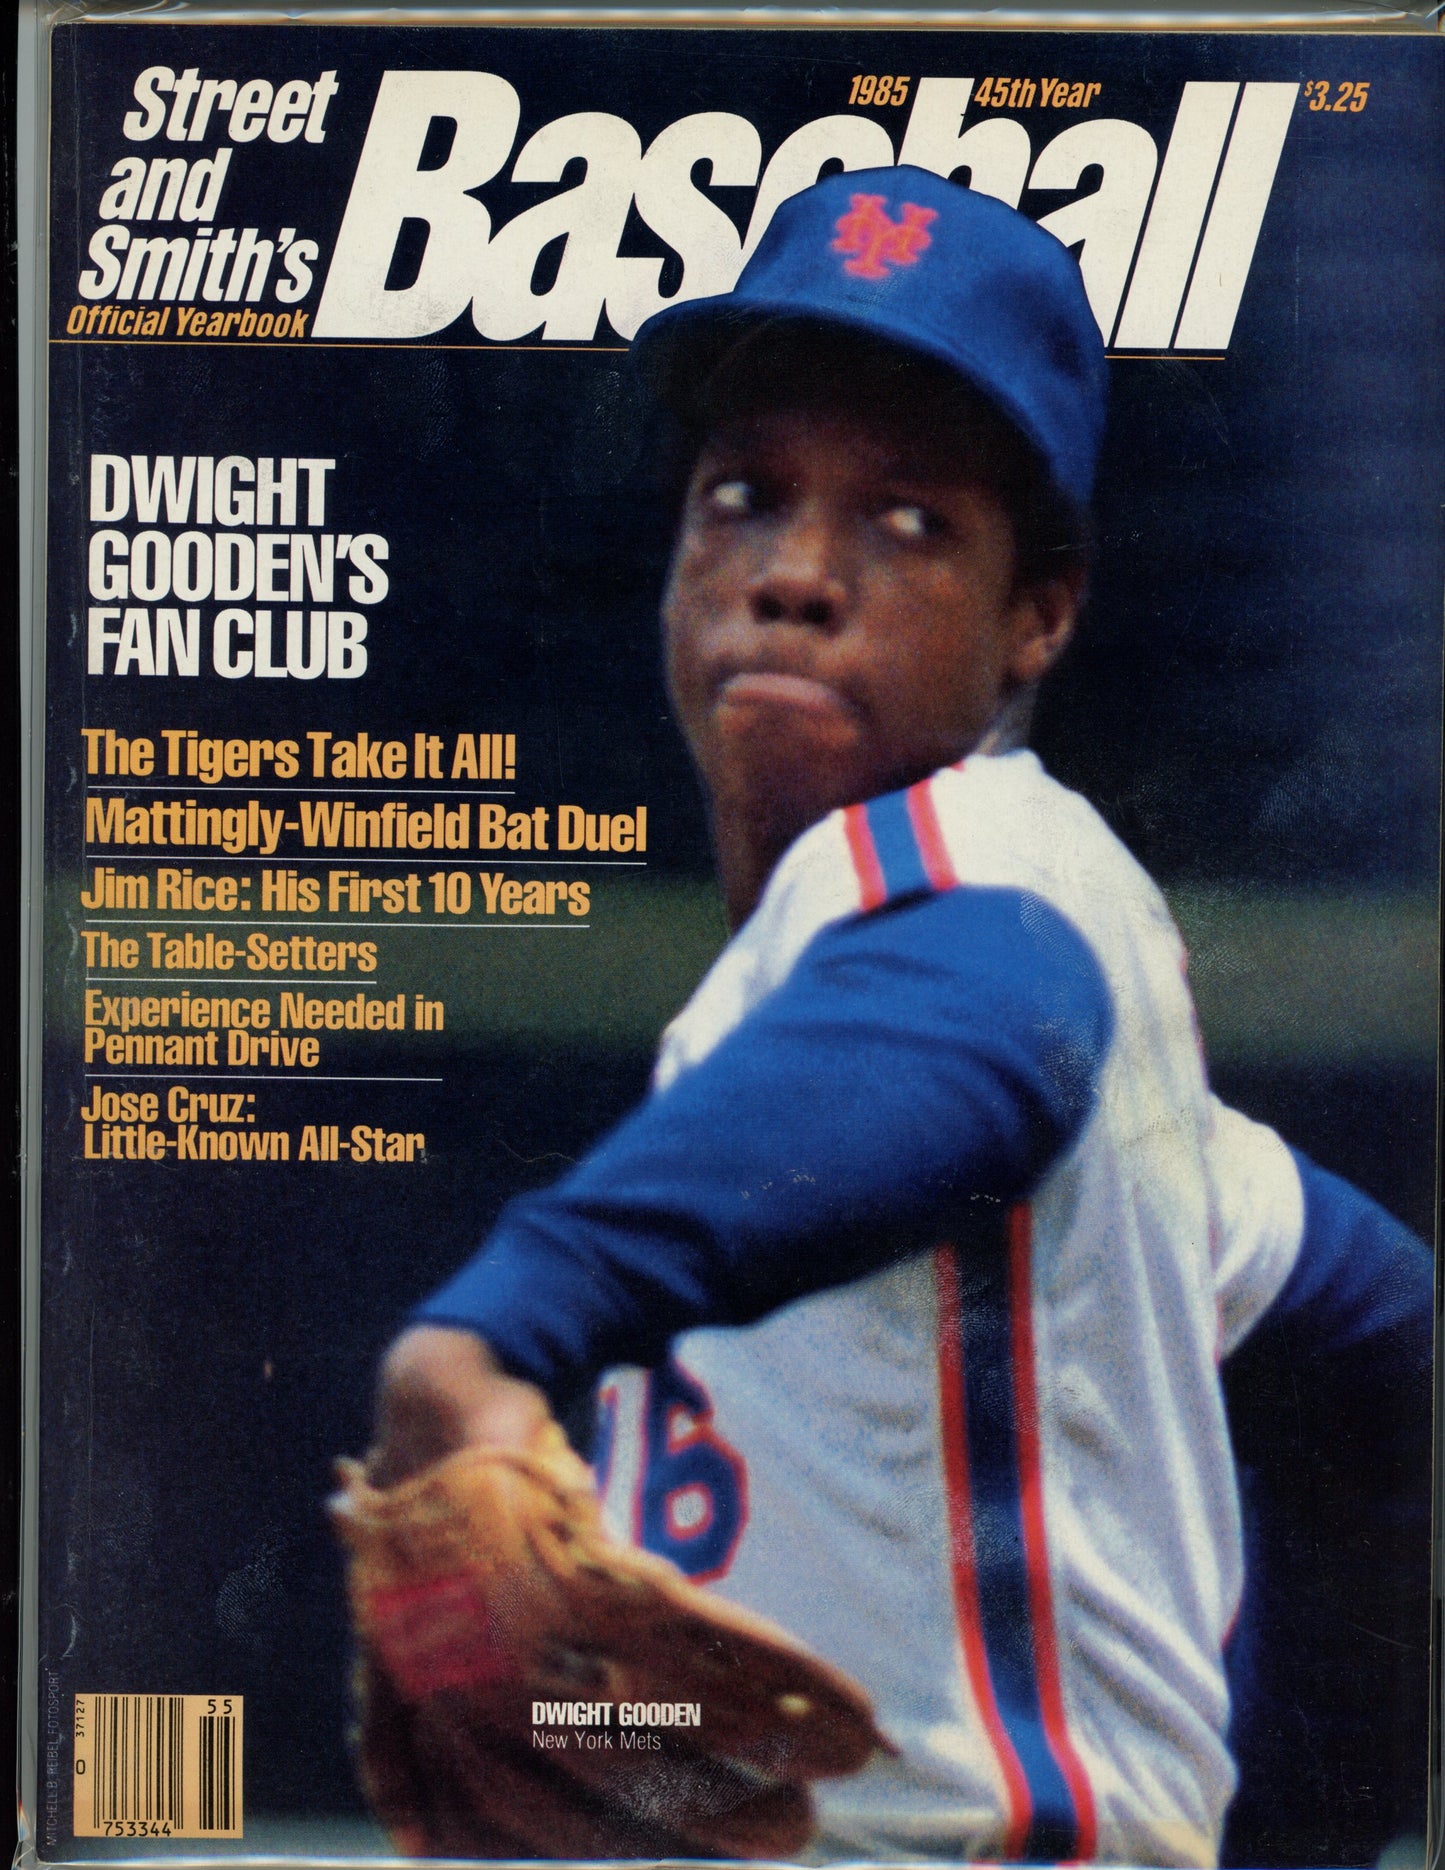 Street And Smith's Vintage Baseball Magazine (1985 Yearbook) Dwight Gooden